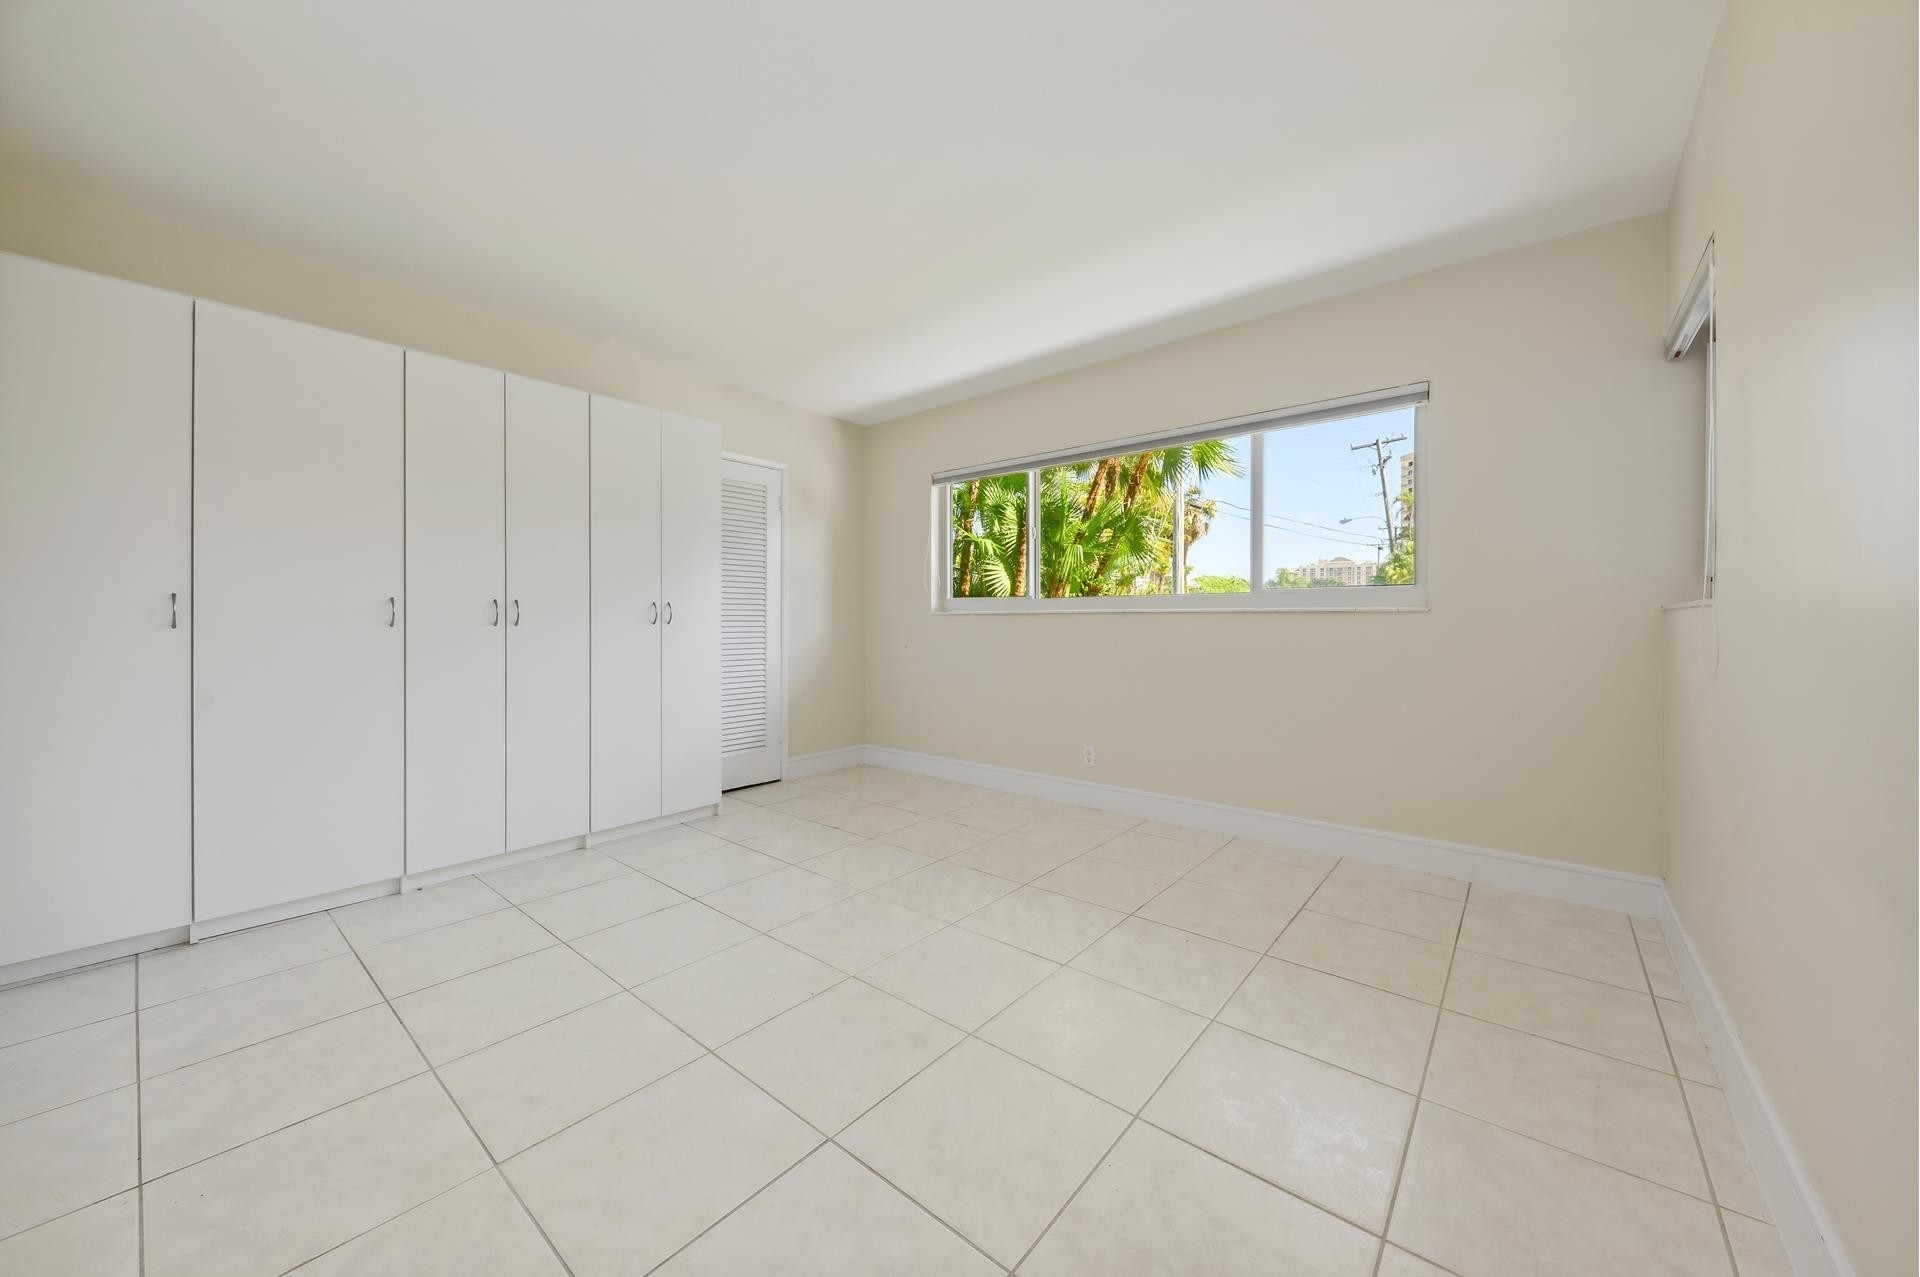 11. Co-op Properties for Sale at 1201 S Riverside Dr, 107 Lakeside, Pompano Beach, FL 33062